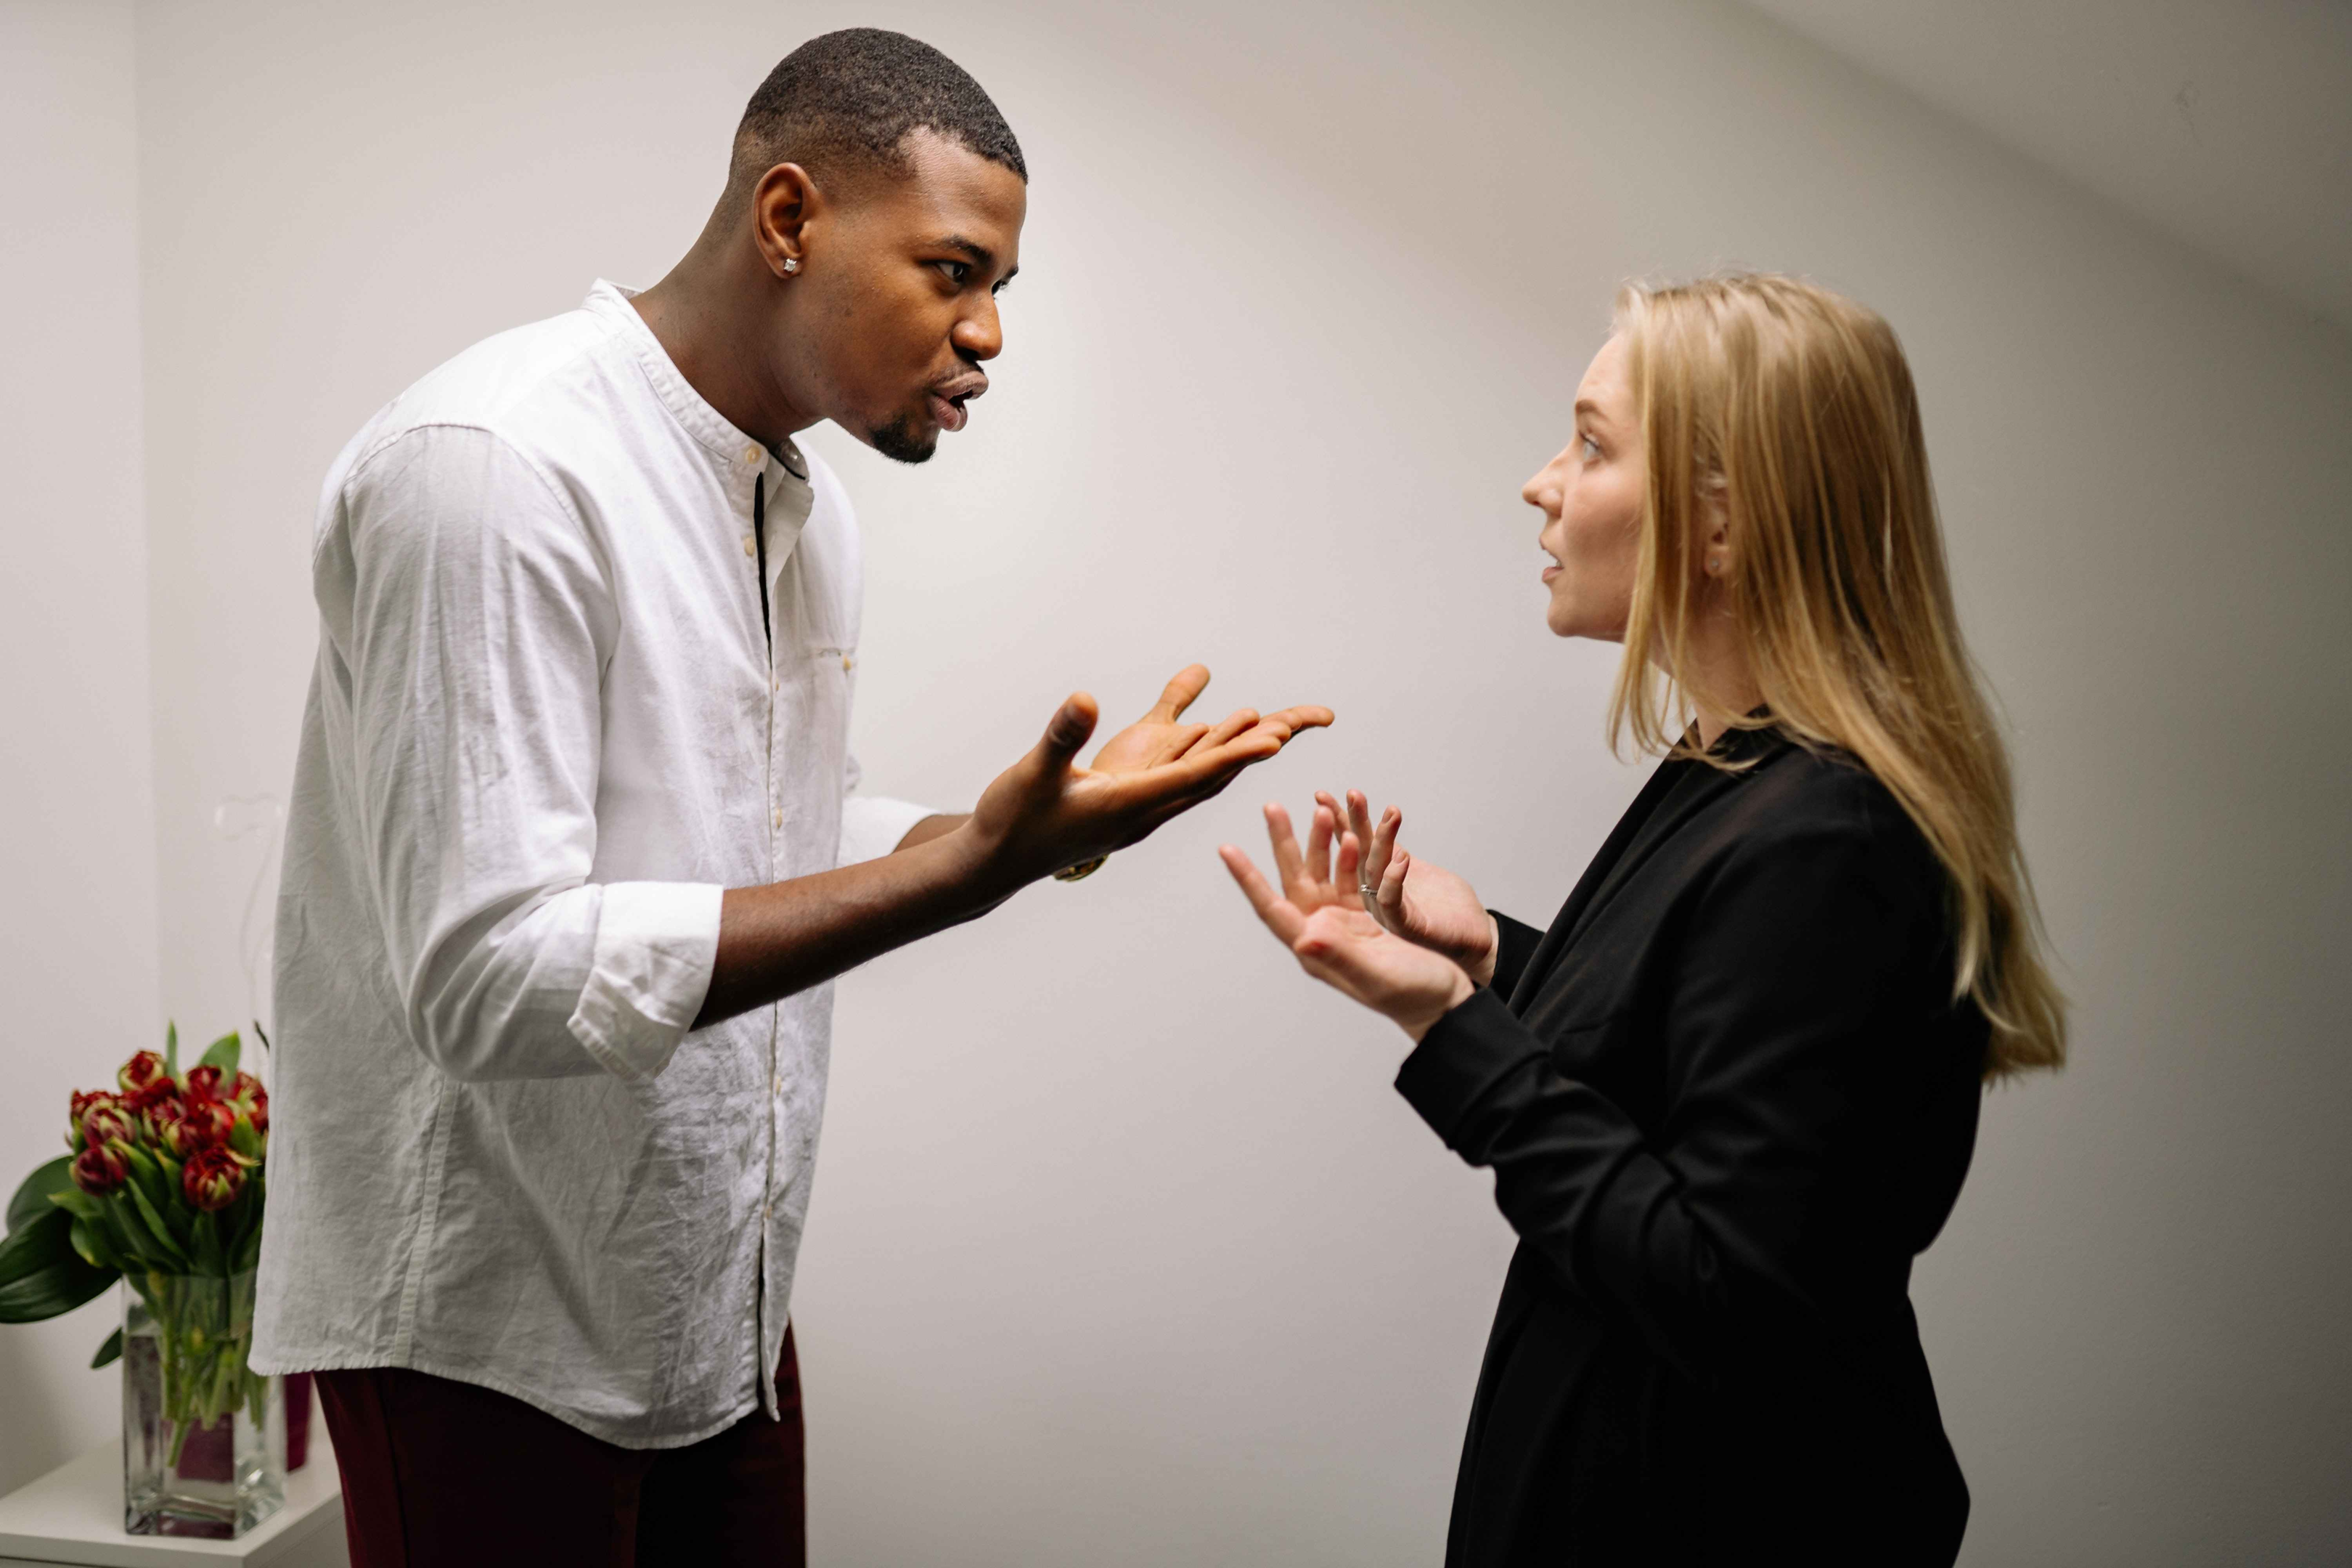 Personality styles can cause major disagreement